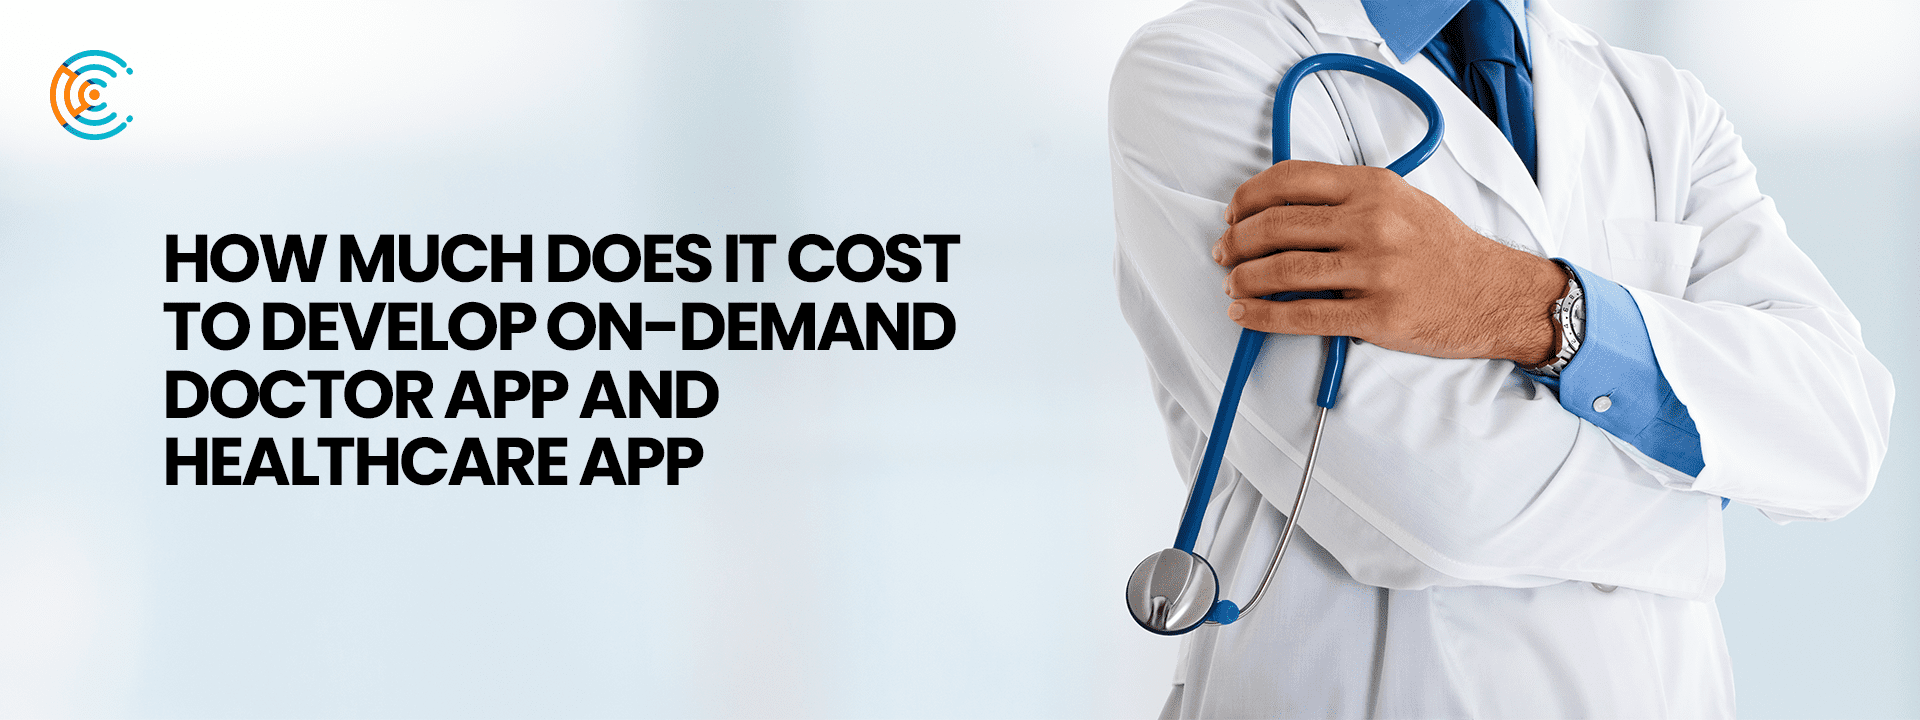 Cost To Develop On-Demand Doctor App